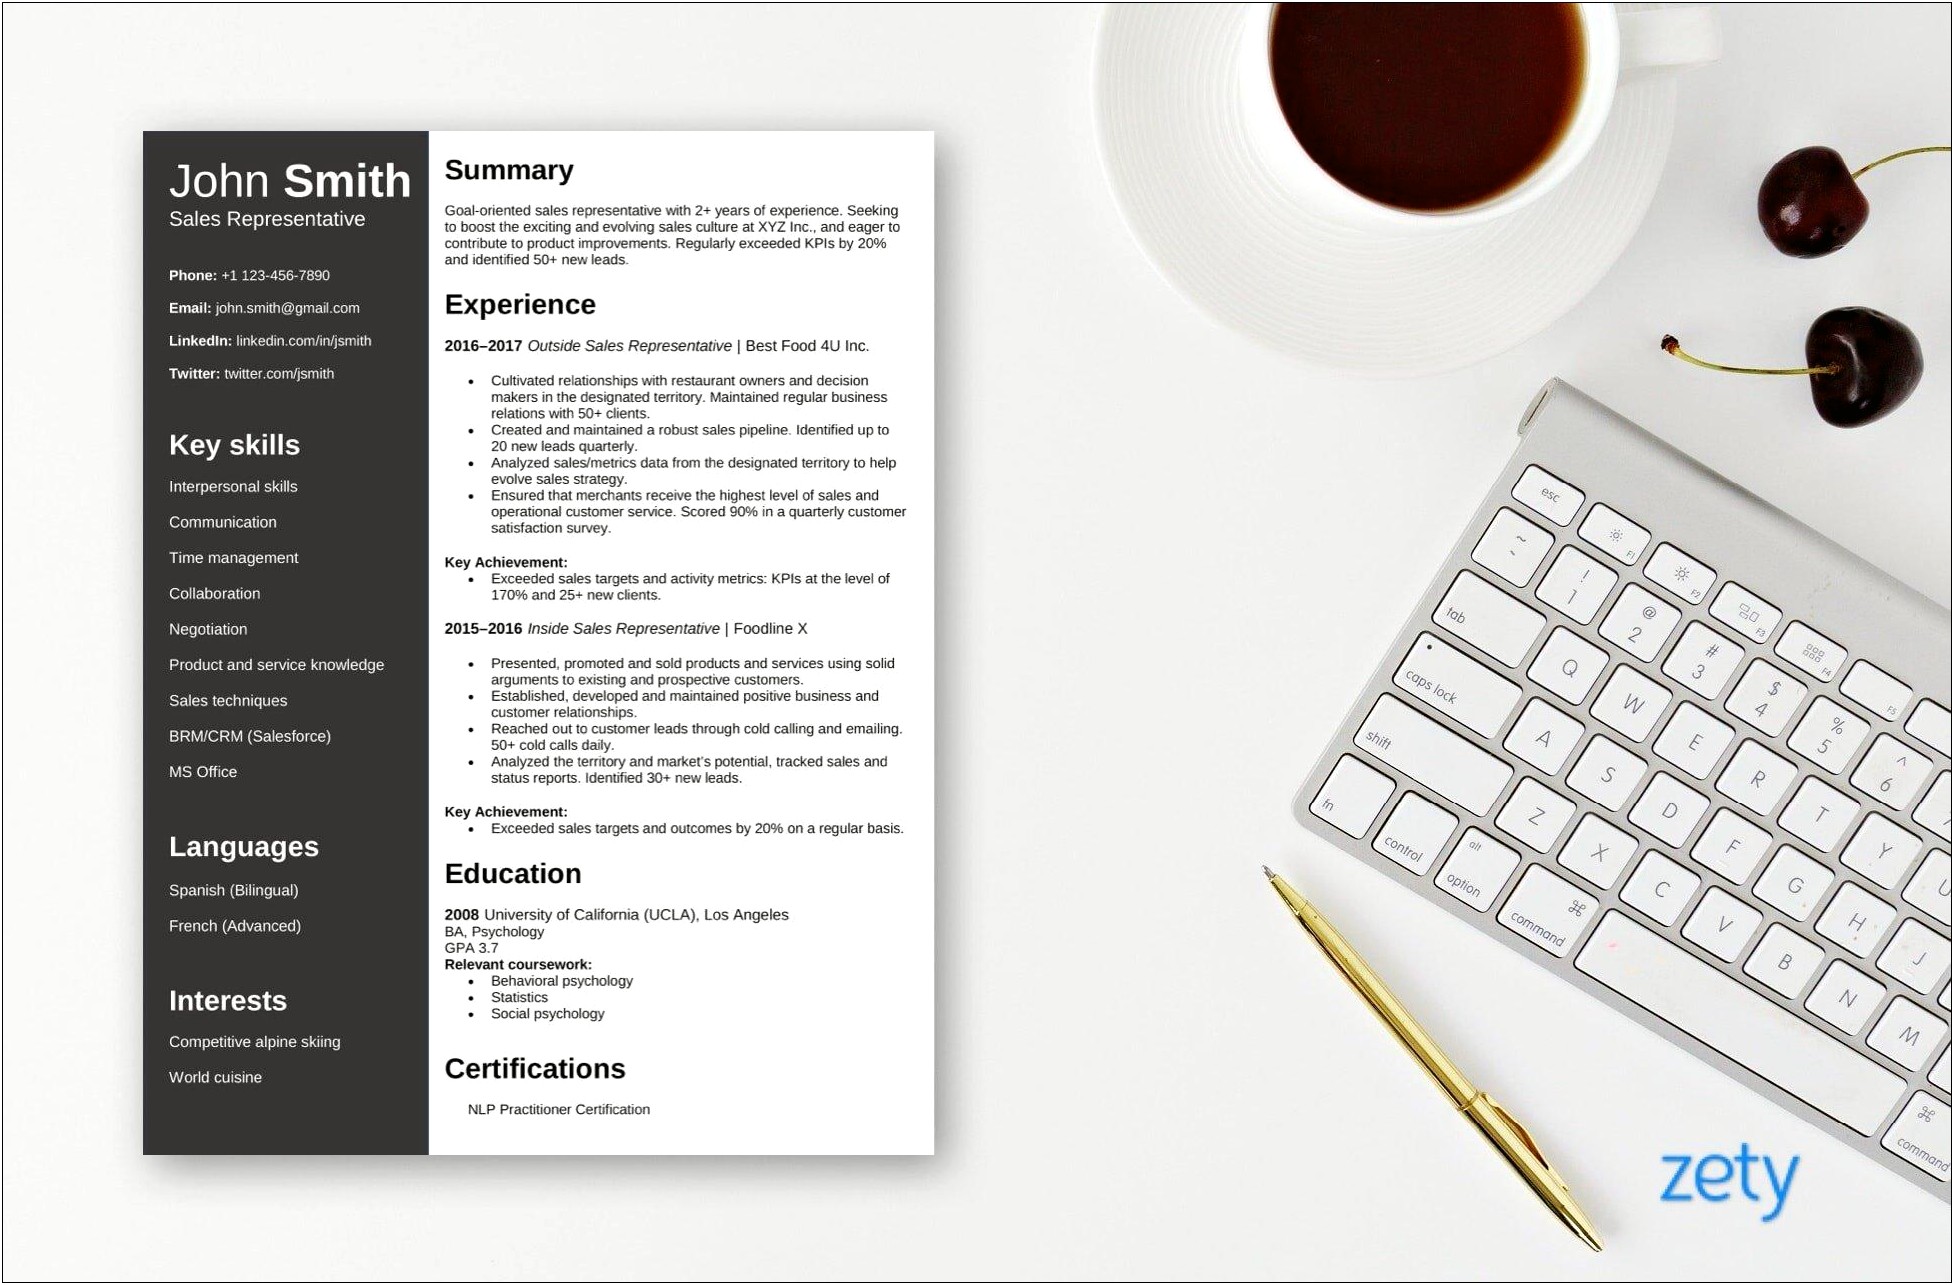 Downloadable Resume Templates For Office Libre